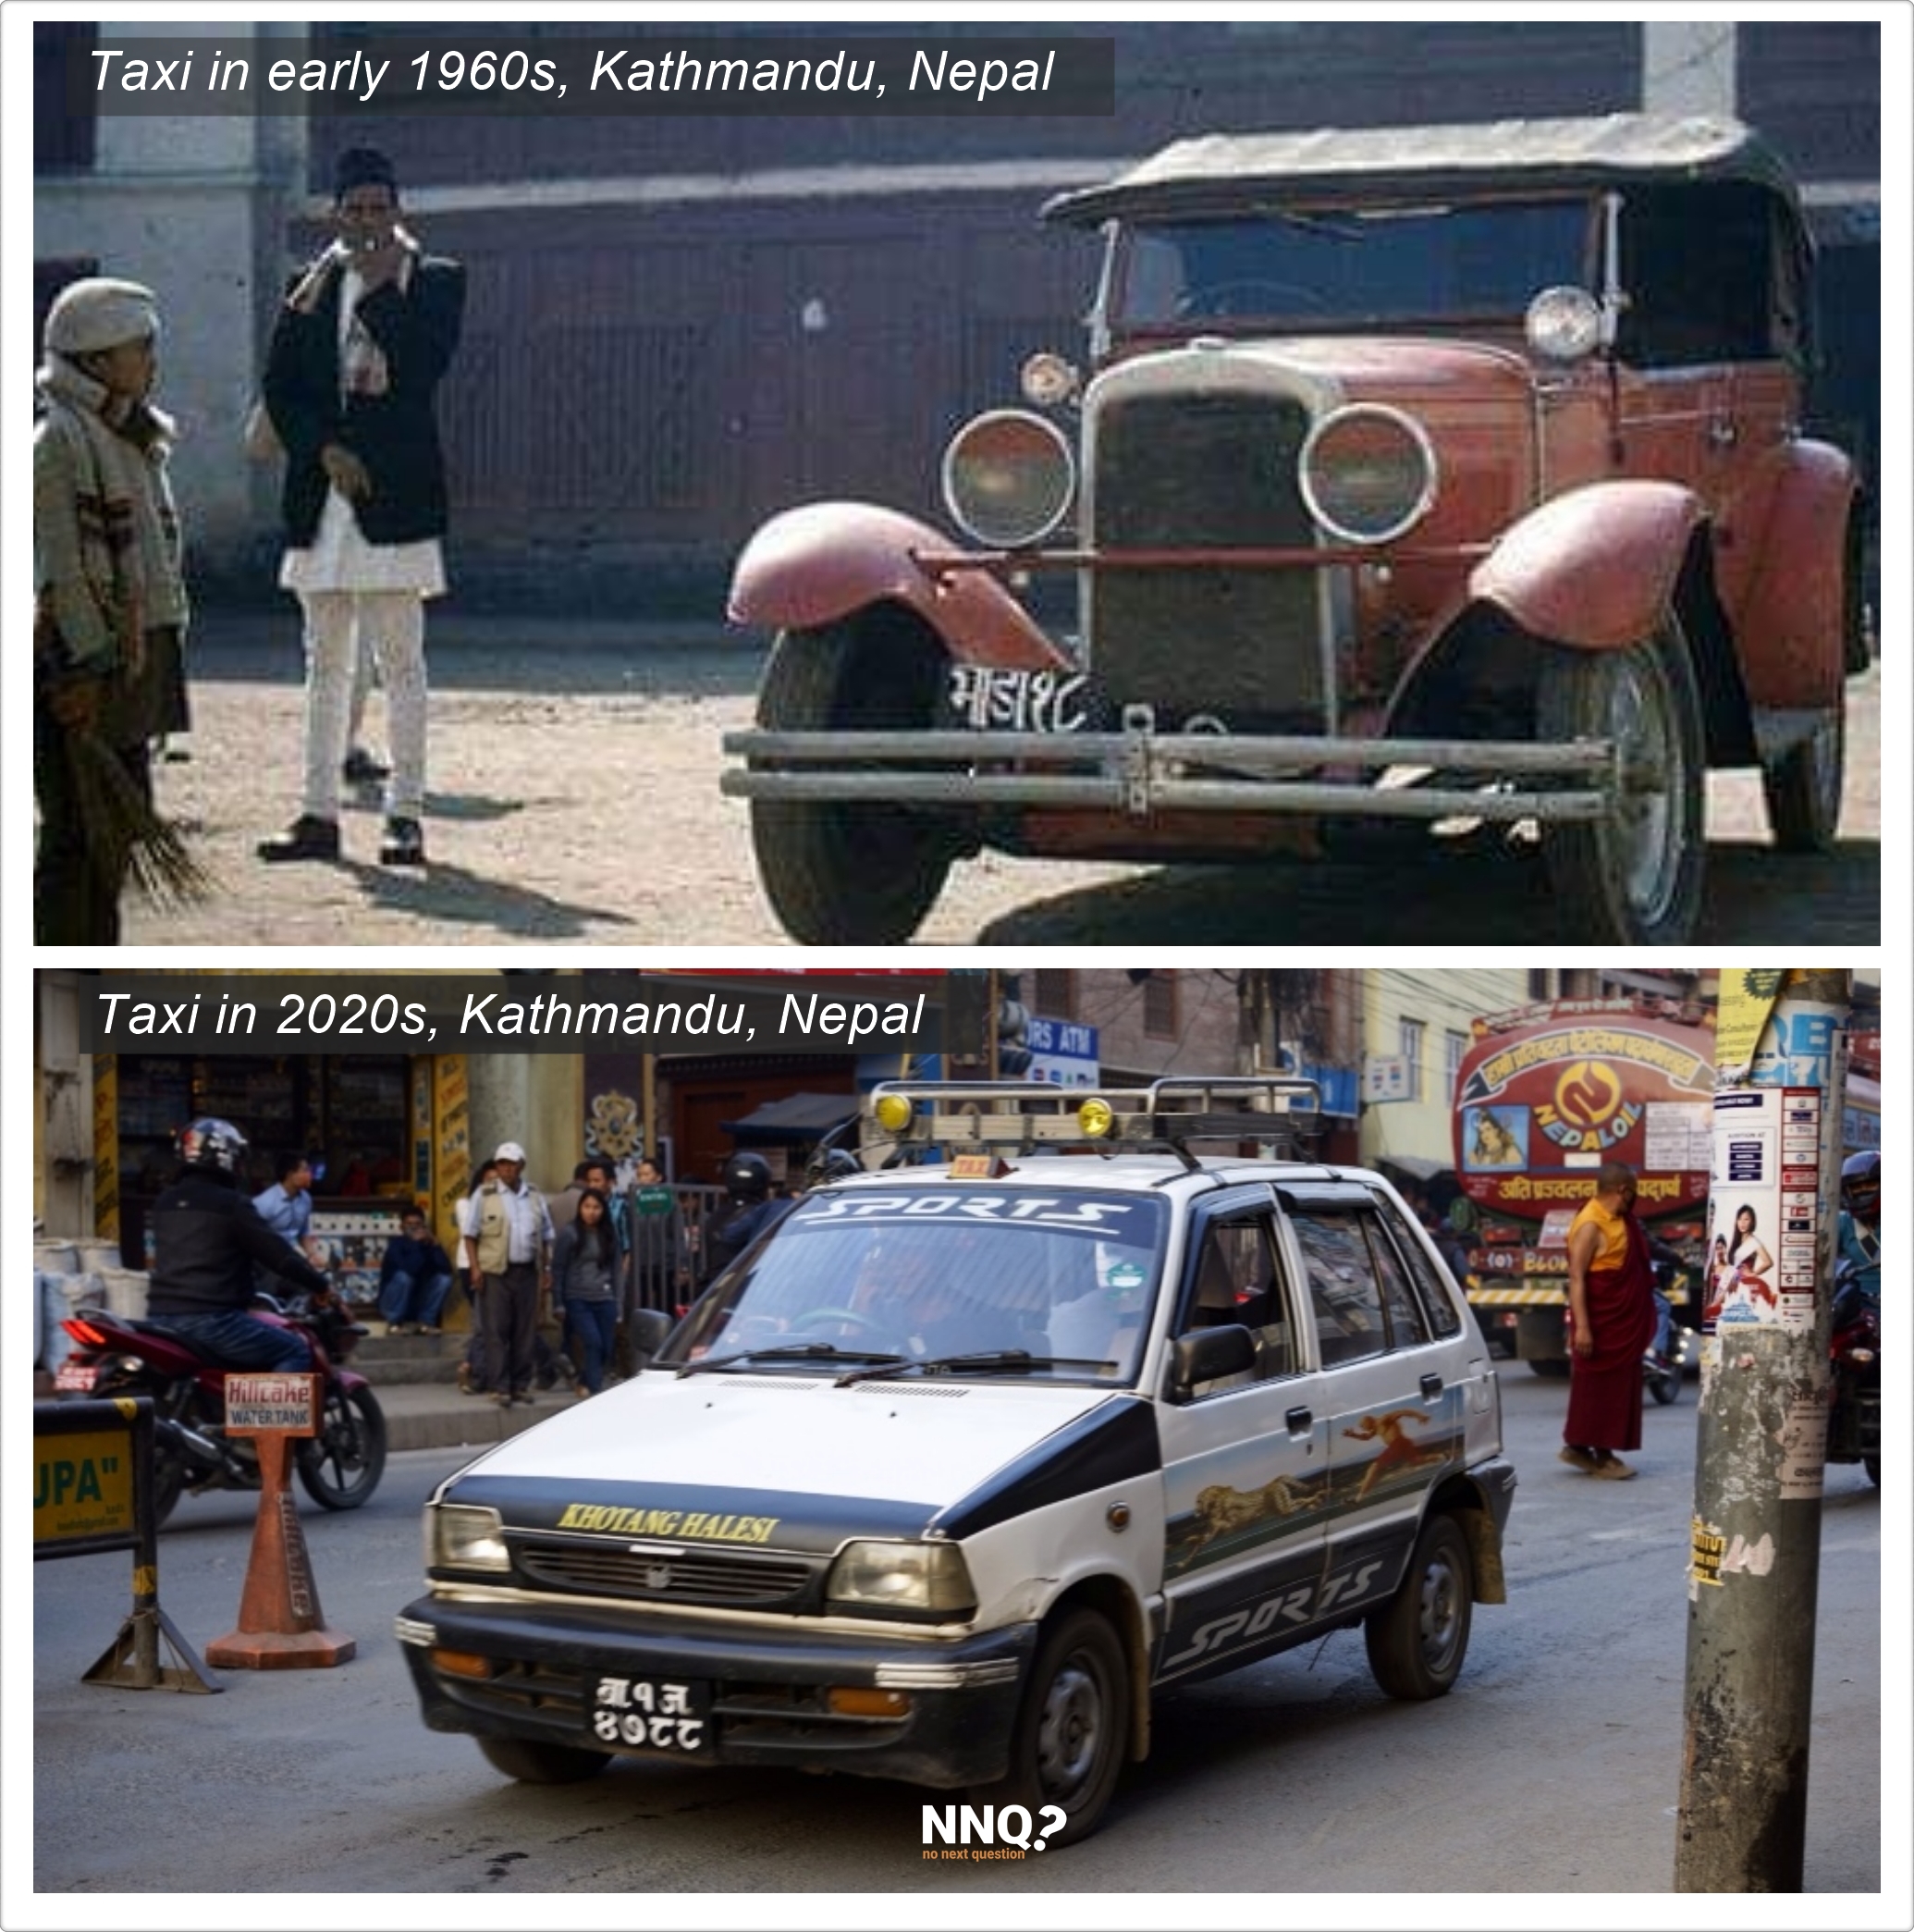 Taxis in Nepal 1960s – 2000s